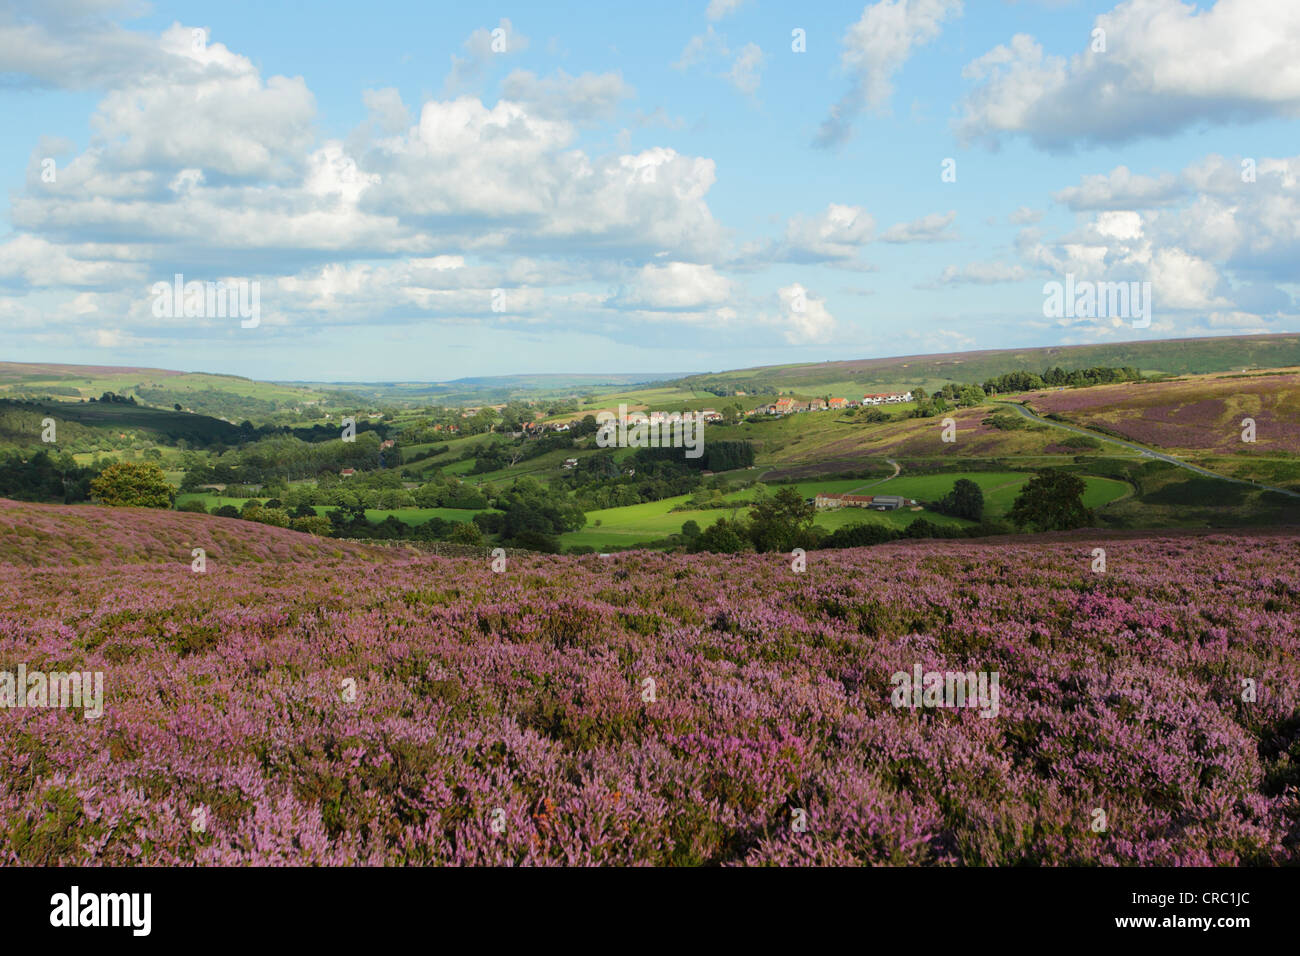 Castleton Village in the upper Esk Valley in the North York Moors National Park surrounded by flowering heather Stock Photo